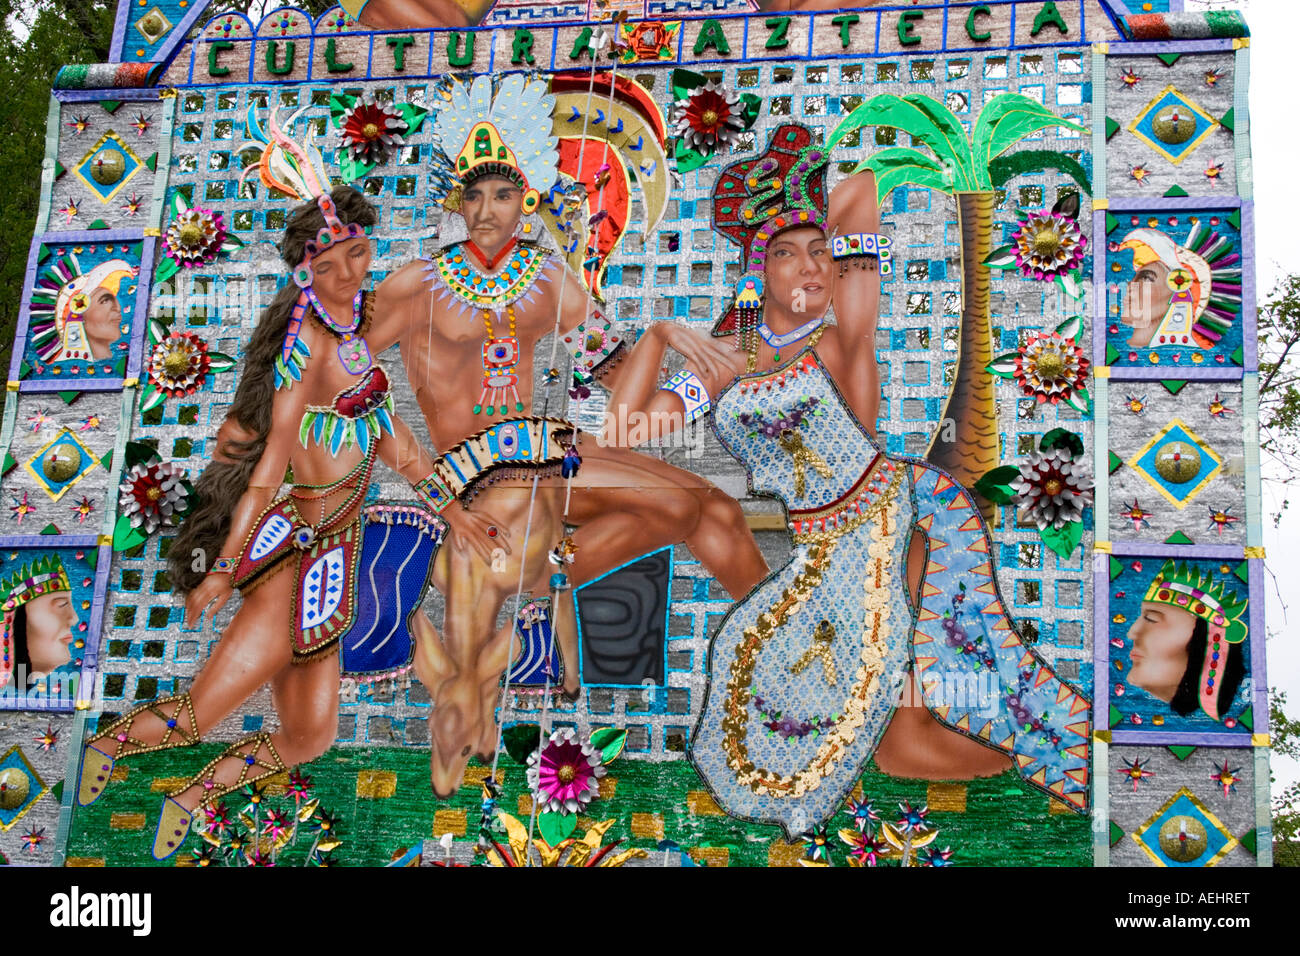 Section of poster with paintings depicting the culture of Mexican Aztec Indians. Cinco de Mayo Fiesta. 'St Paul' Minnesota USA Stock Photo